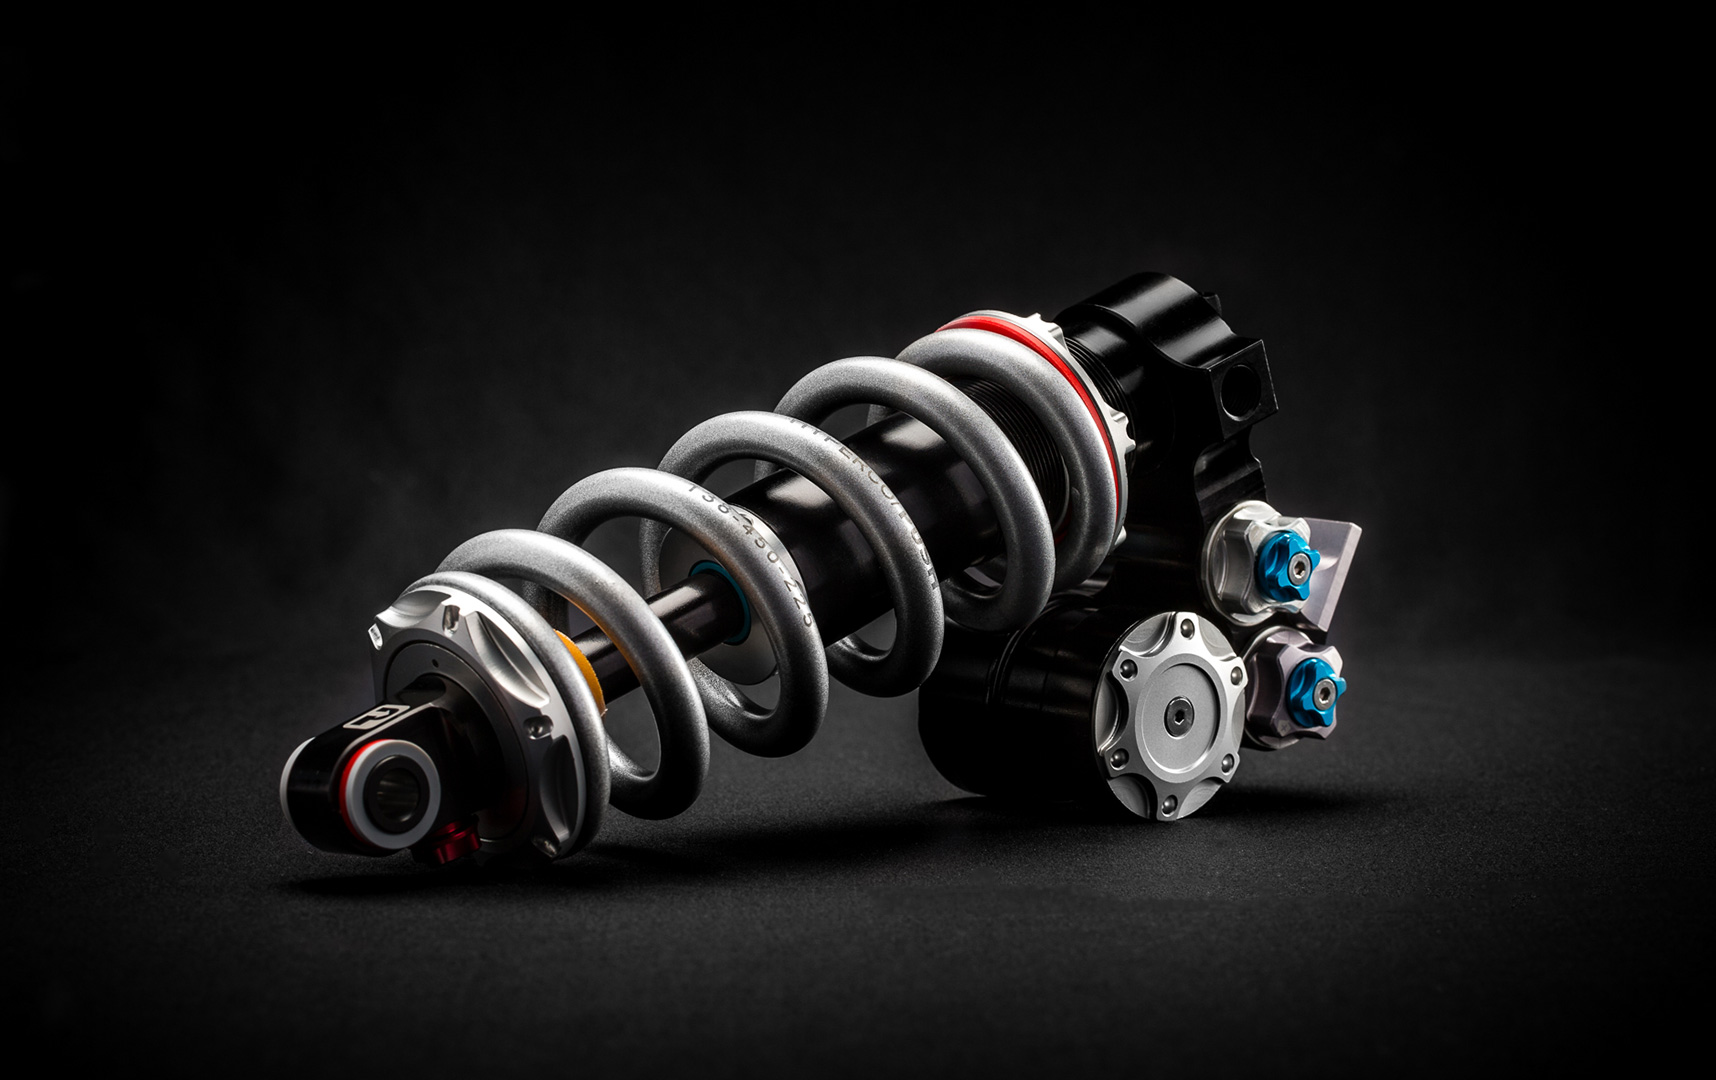 jimmy_bowron_product_photography_push_suspension_1.jpg